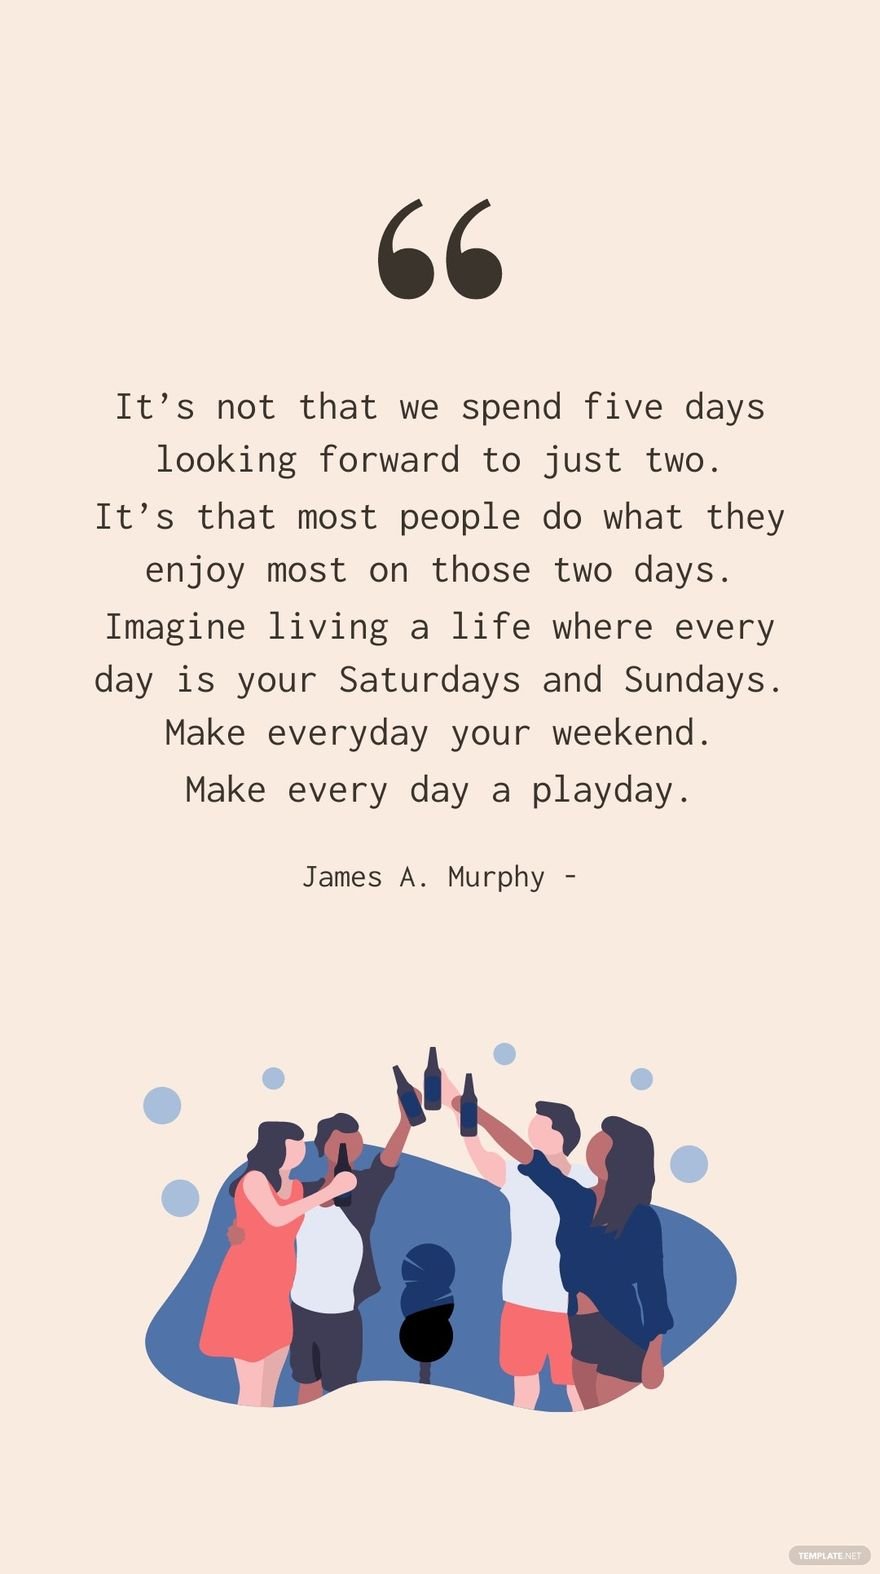 James A. Murphy - It’s not that we spend five days looking forward to just two. It’s that most people do what they enjoy most on those two days. Imagine living a life where every day is your Saturdays